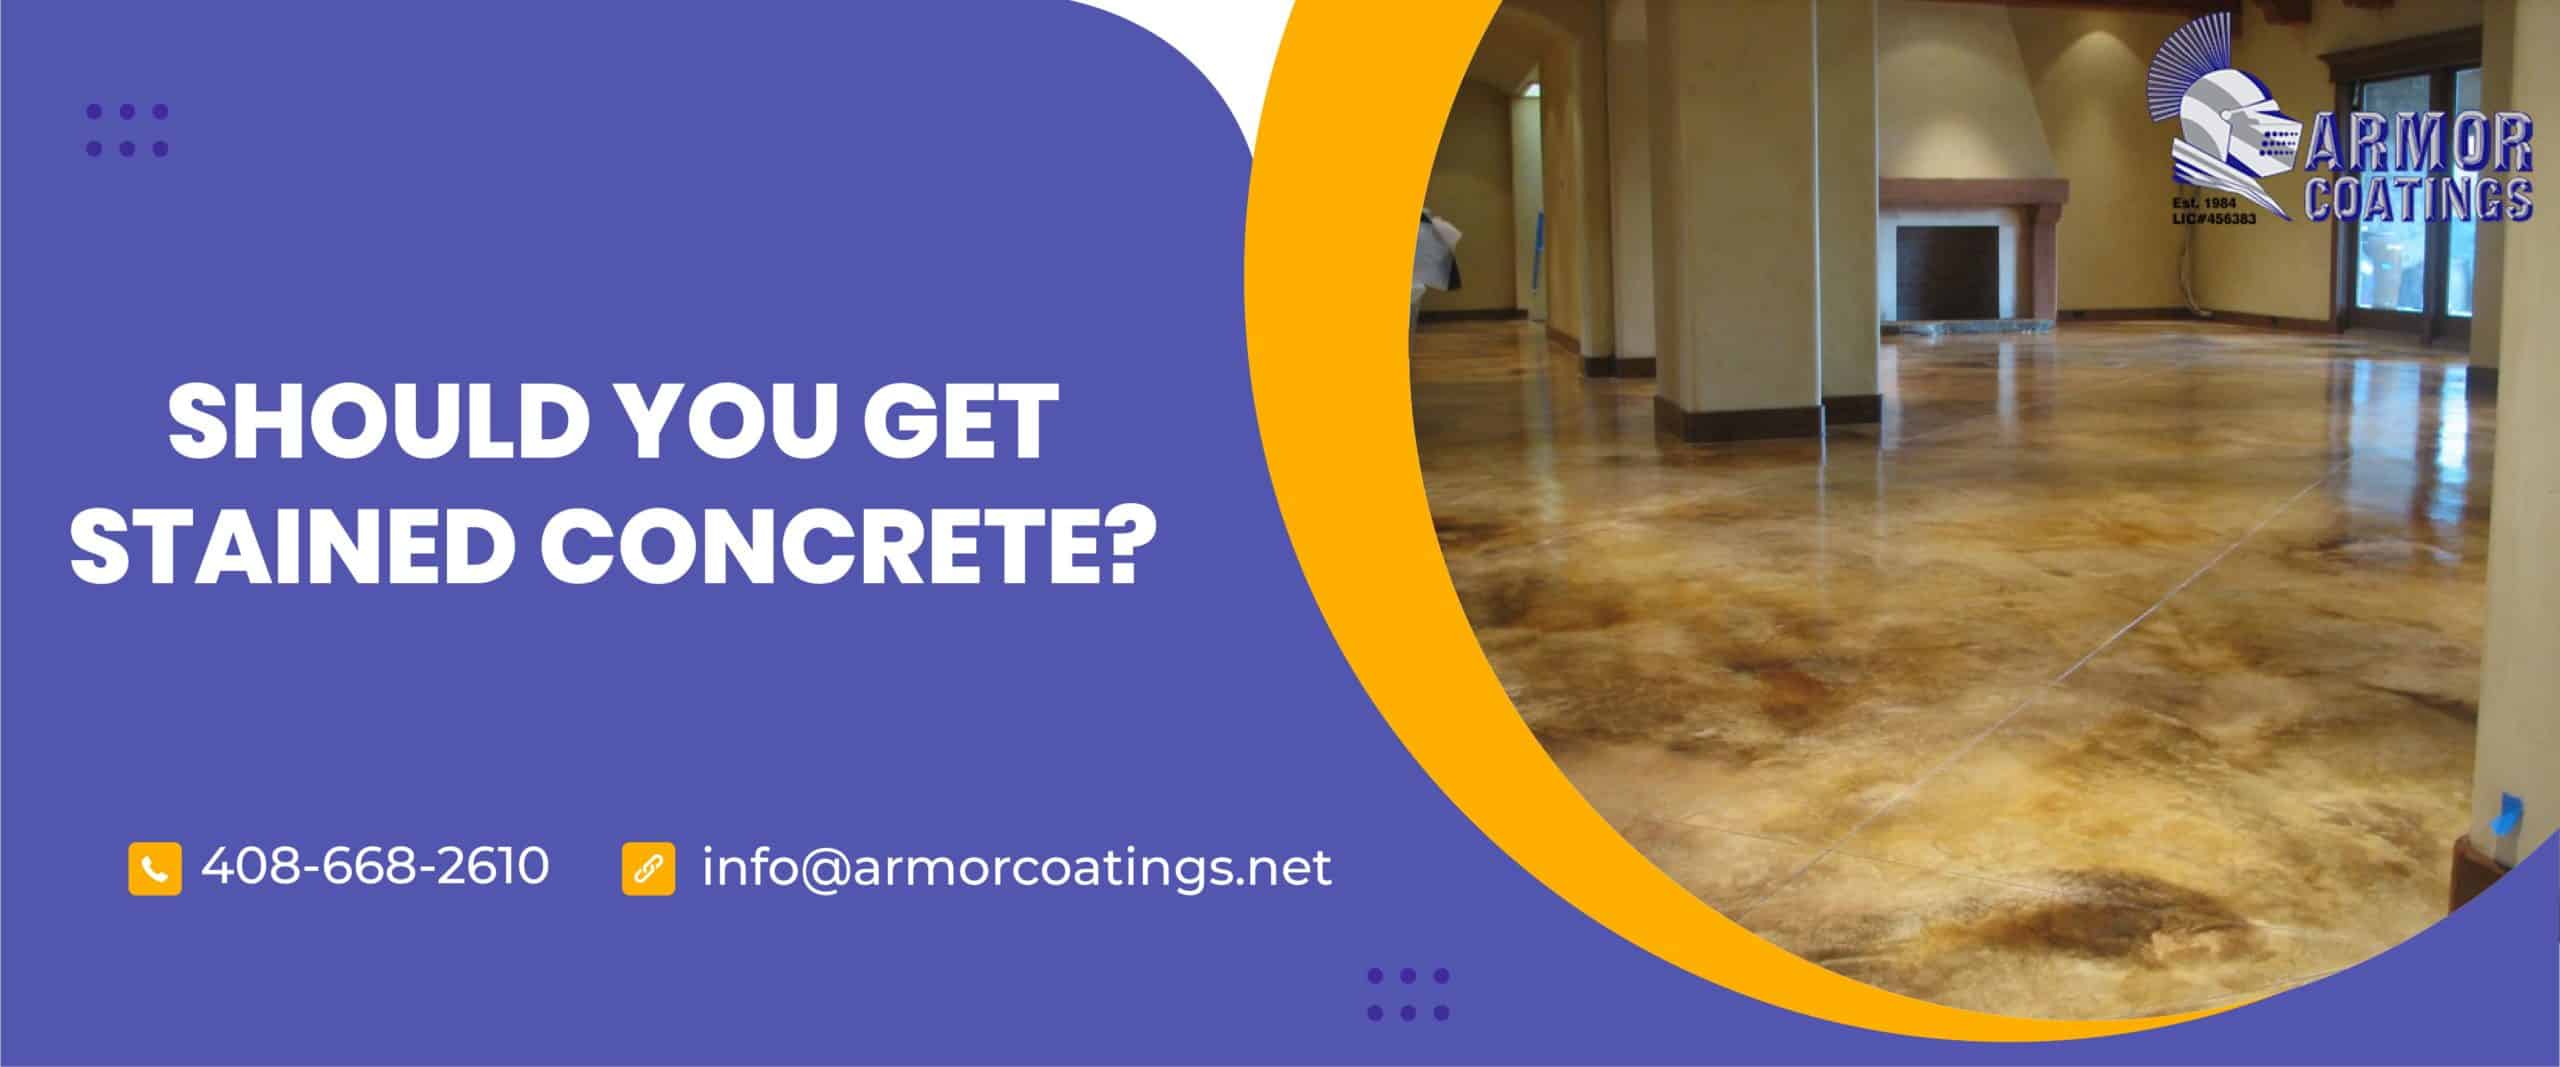 should you get stained concrete